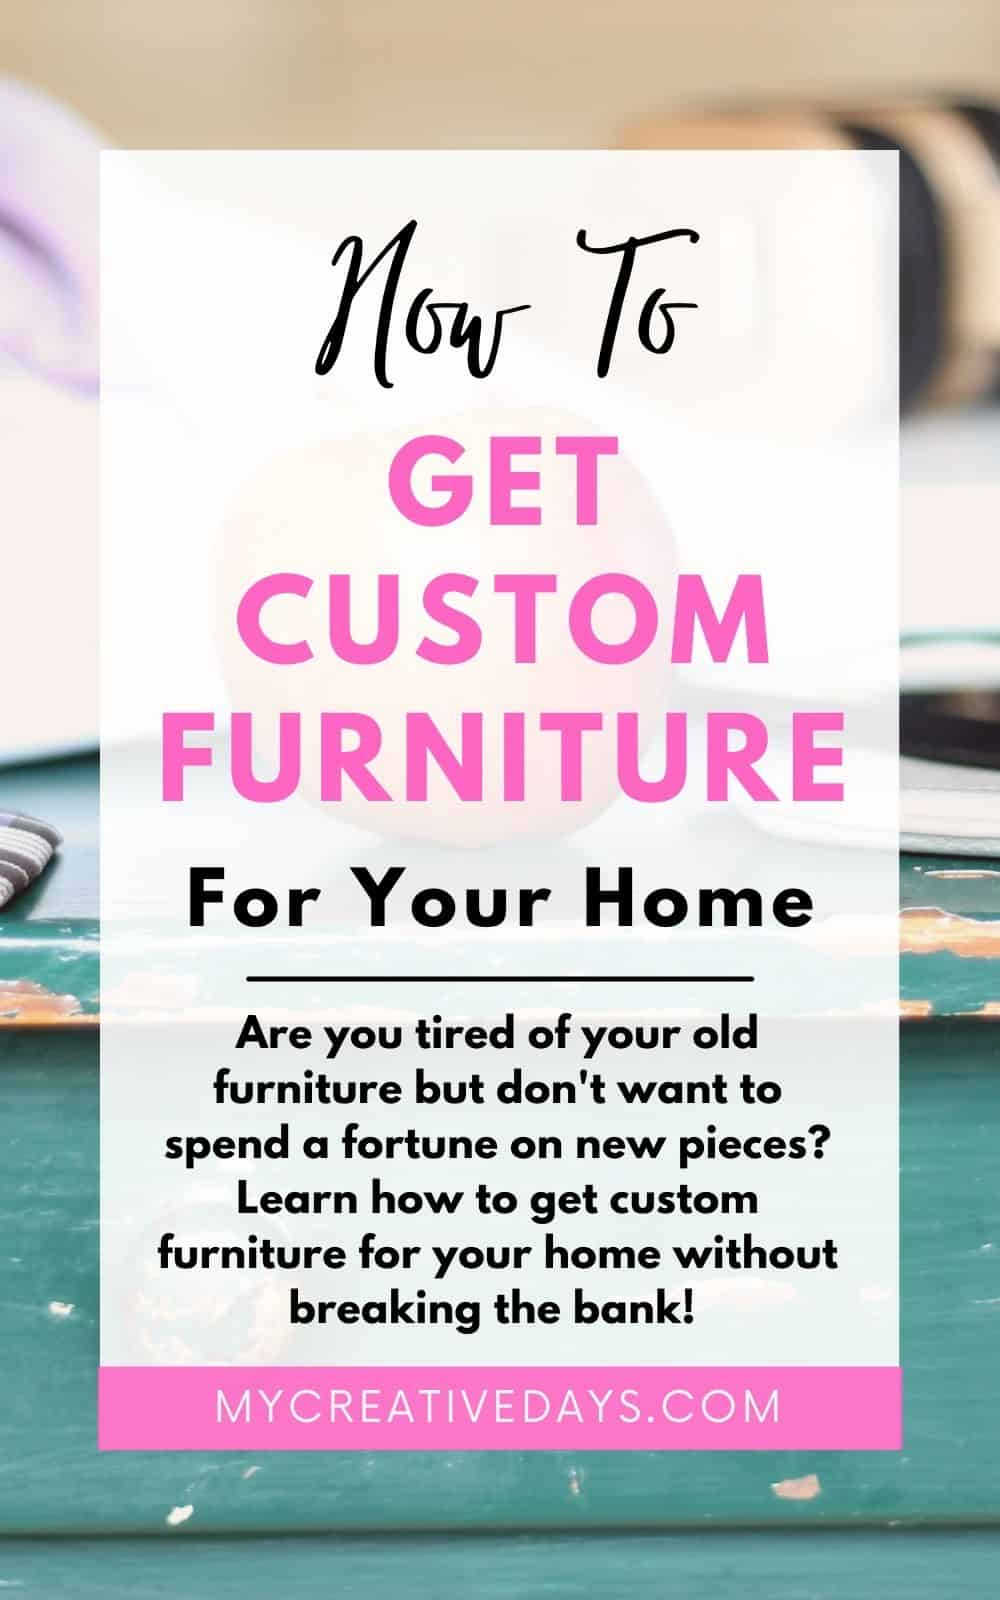 Tired of your old furniture but don't want to spend a fortune on new pieces? Learn how to get custom furniture for your home on the cheap!